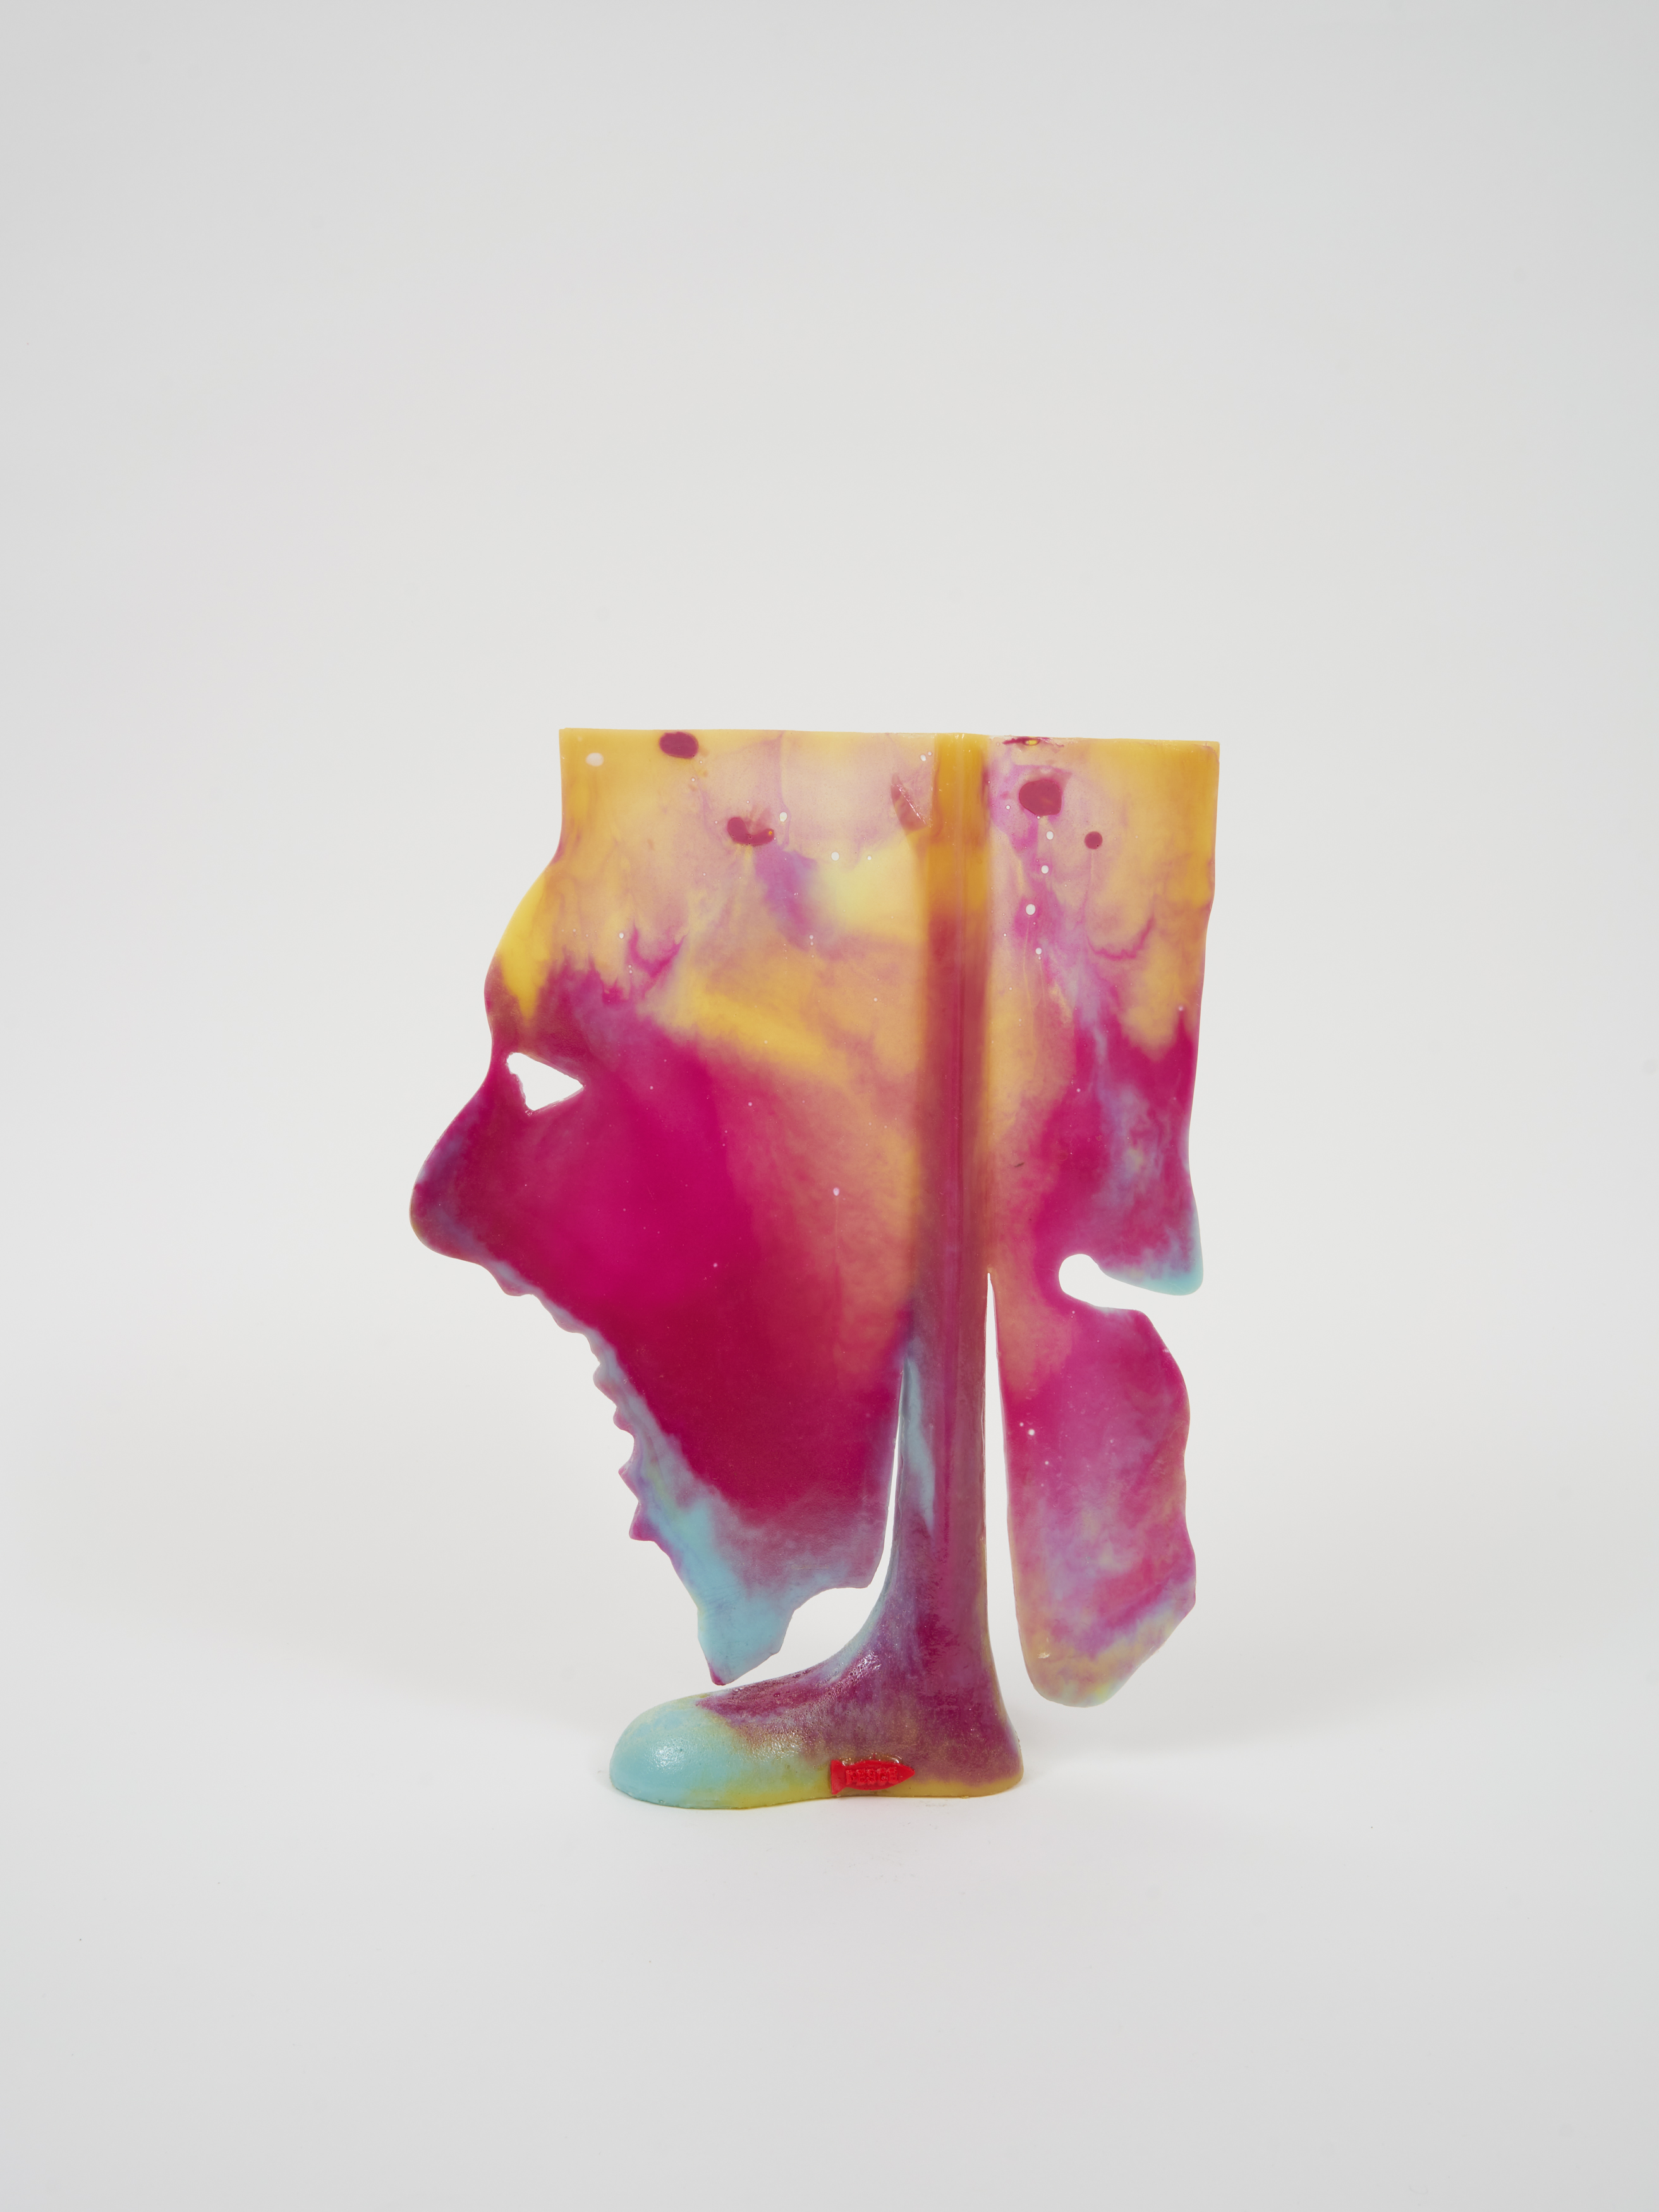 Gaetano Pesce Self Portrait (The Complete Incoherence), 2023 Resin 12